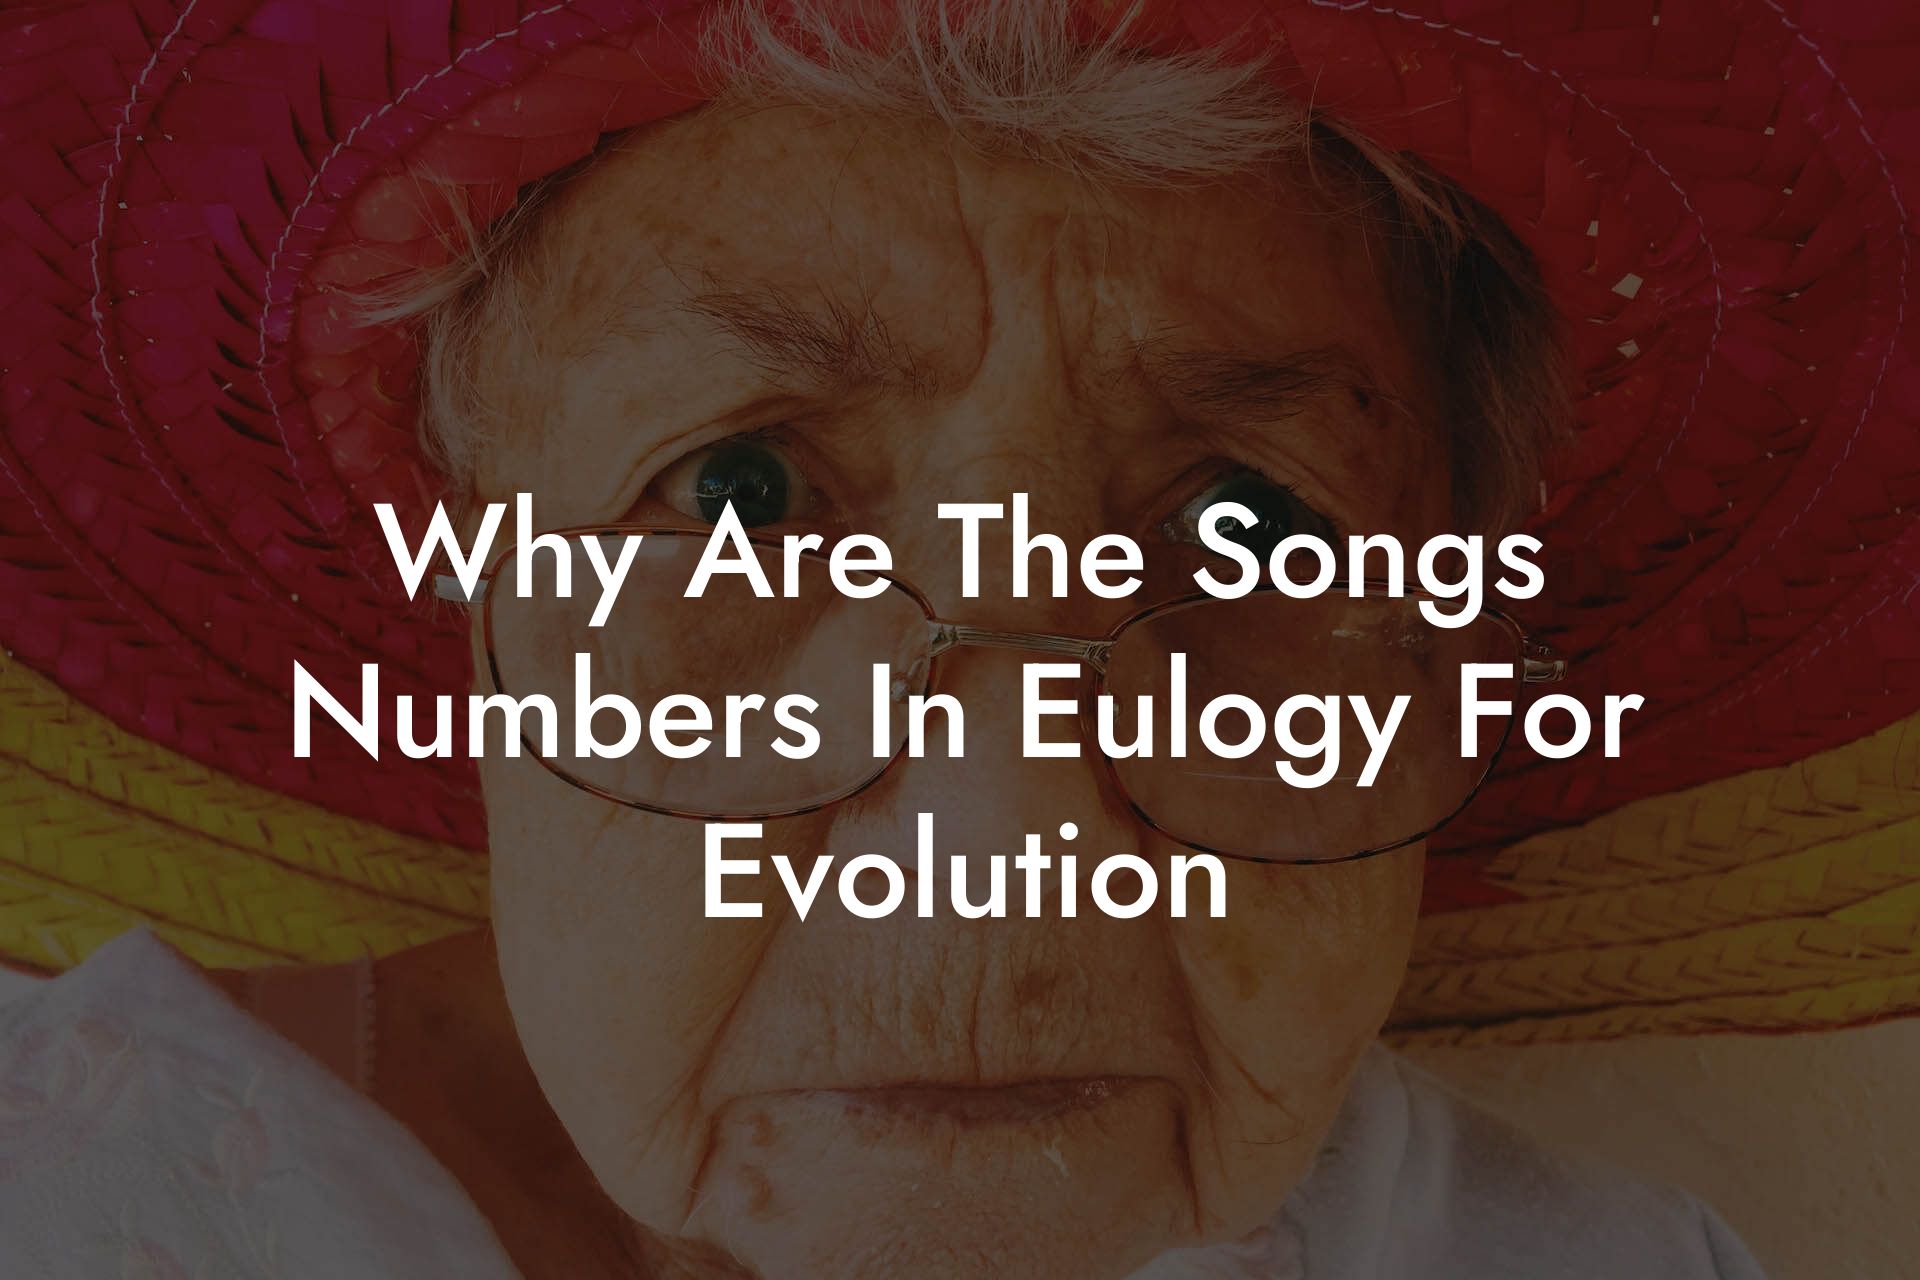 Why Are The Songs Numbers In Eulogy For Evolution